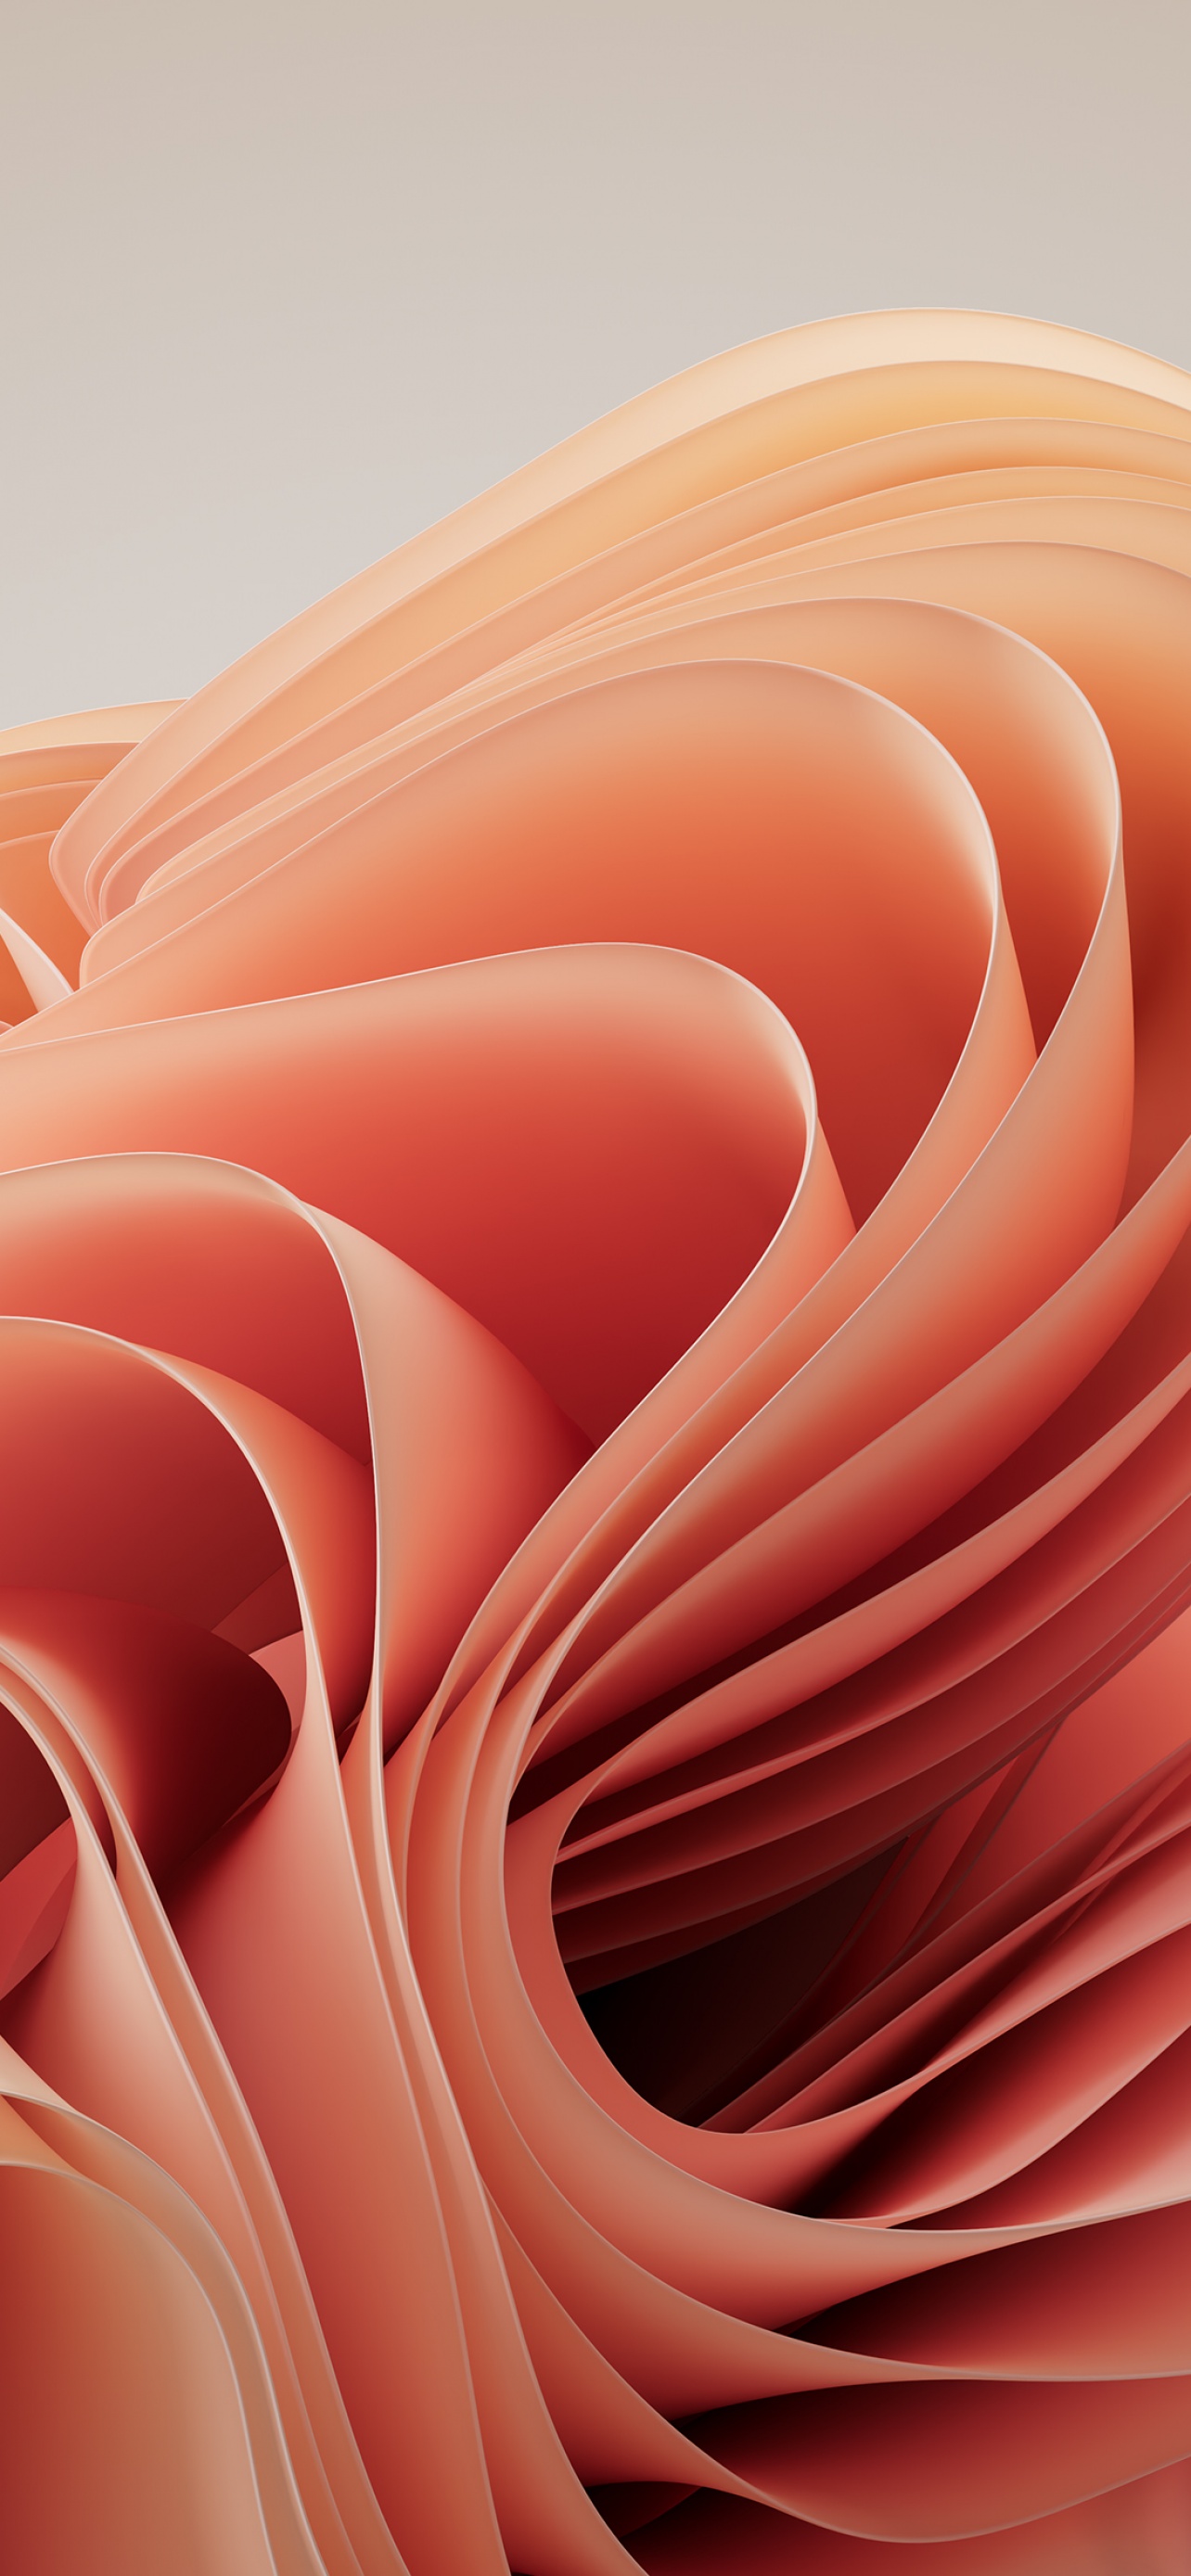 Surface Laptop 5 Wallpaper 4K, Stock, Orange abstract, Abstract, #9054